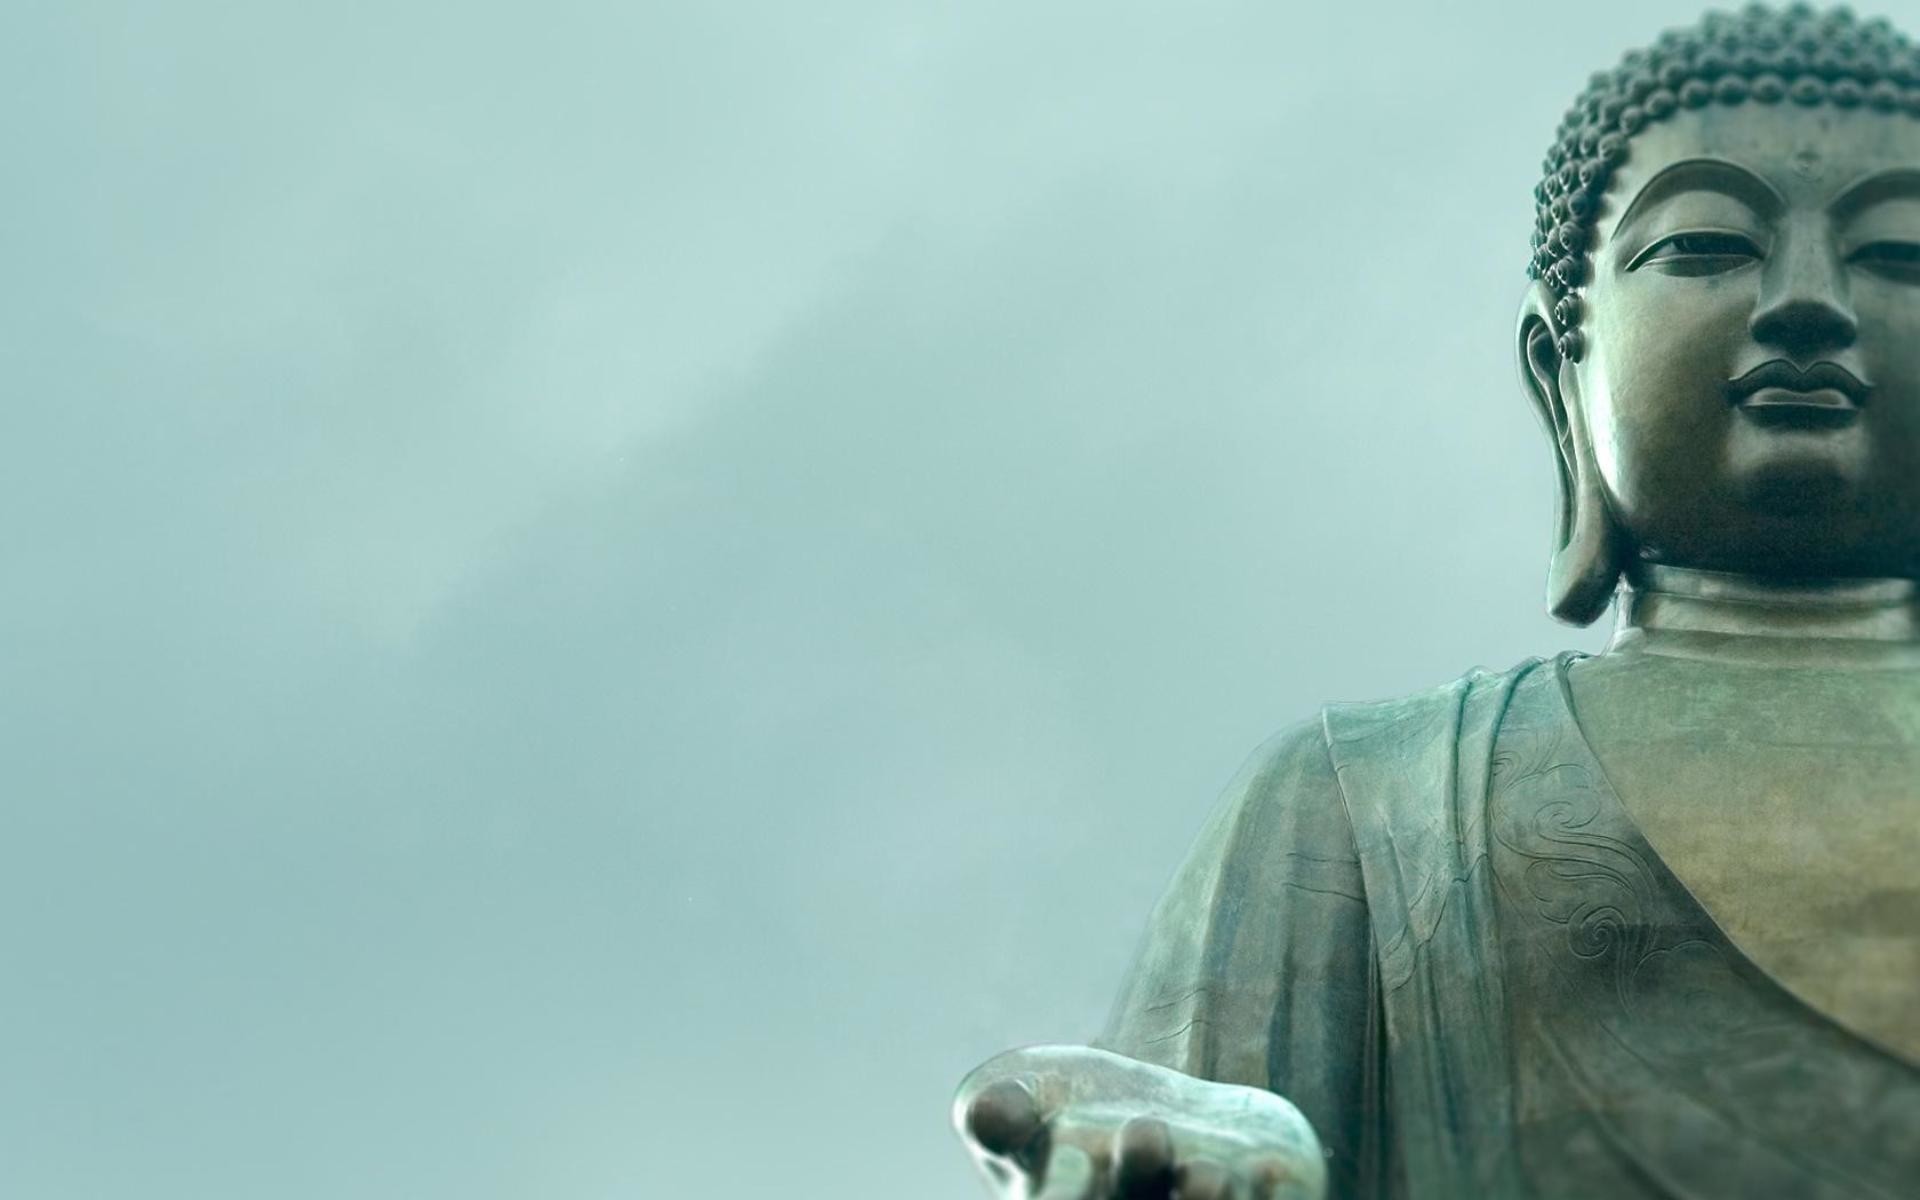 1920x1200 Most Downloaded Buddha Image Wallpapers - Full HD wallpaper search